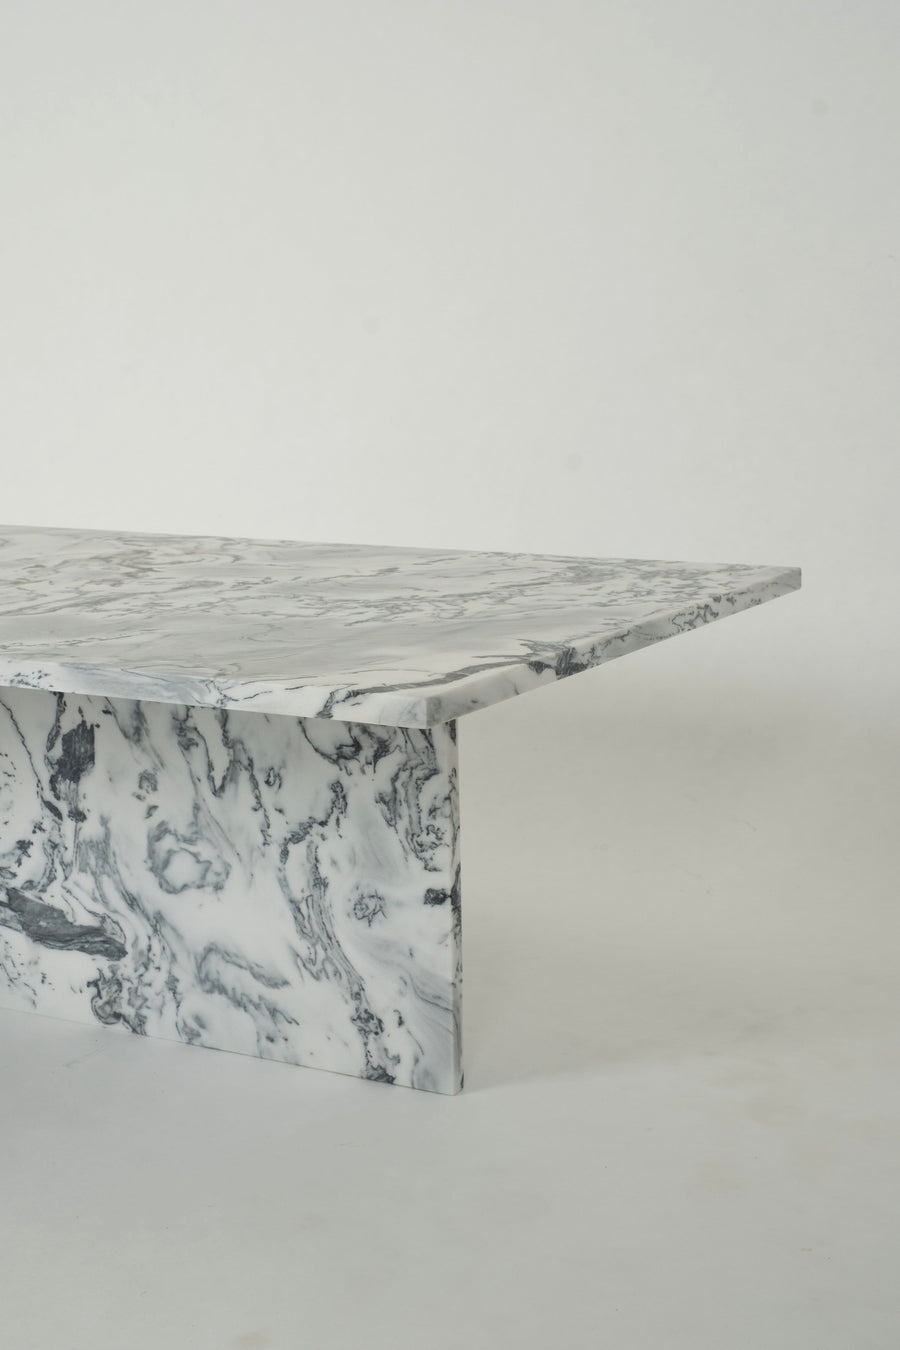 Varitone White Grey Honed Marble T Pedestal Cocktail Table